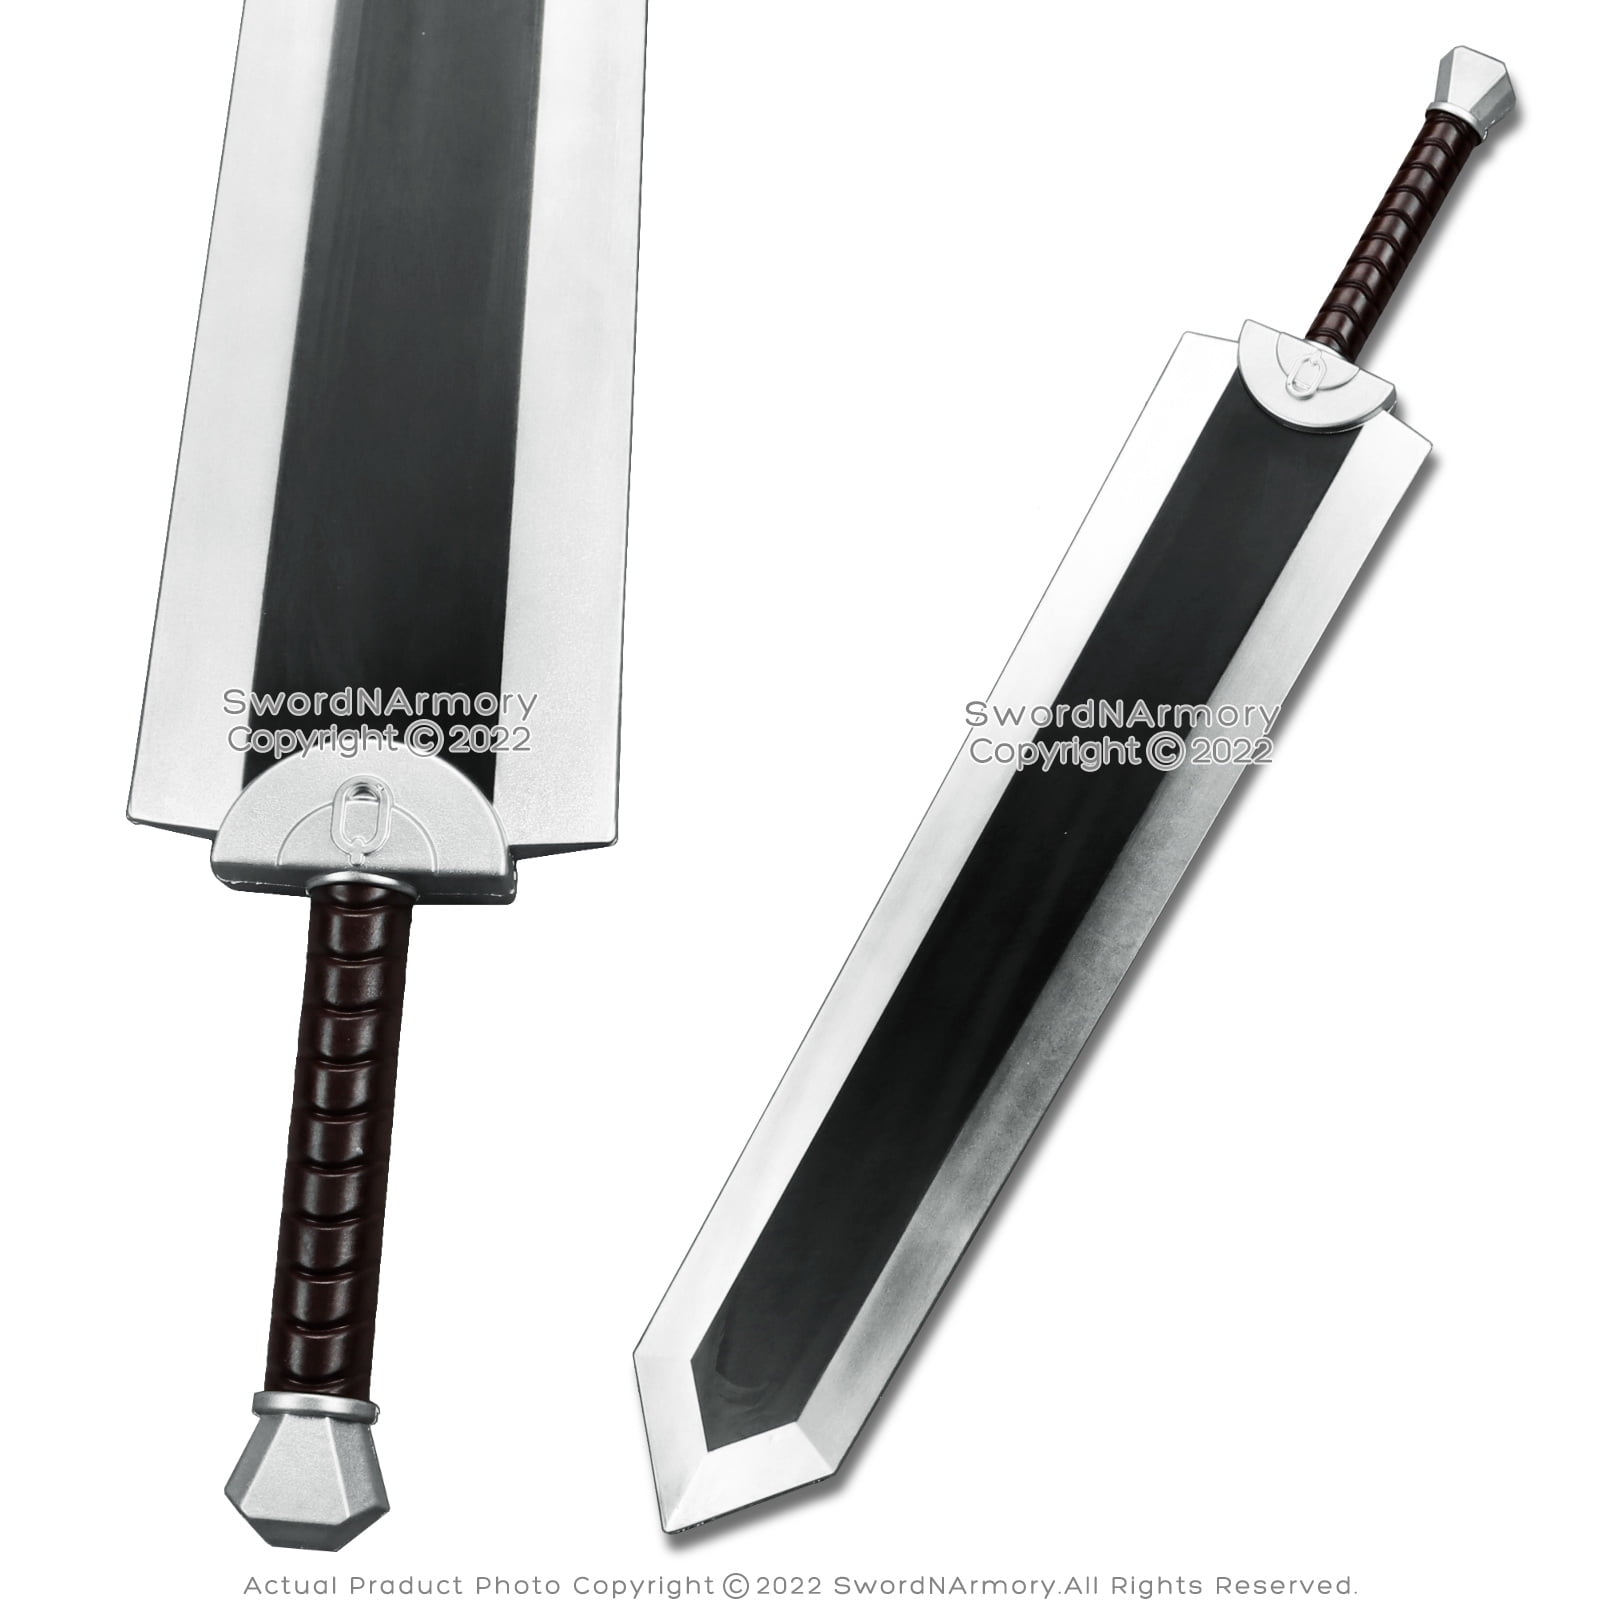  49 Anime Berserk Guts Dragon Great Steel Sword with Carry  Bag,Full Metal Full Tang Cosplay Prop,for Collection,Stage Performance :  Sports & Outdoors